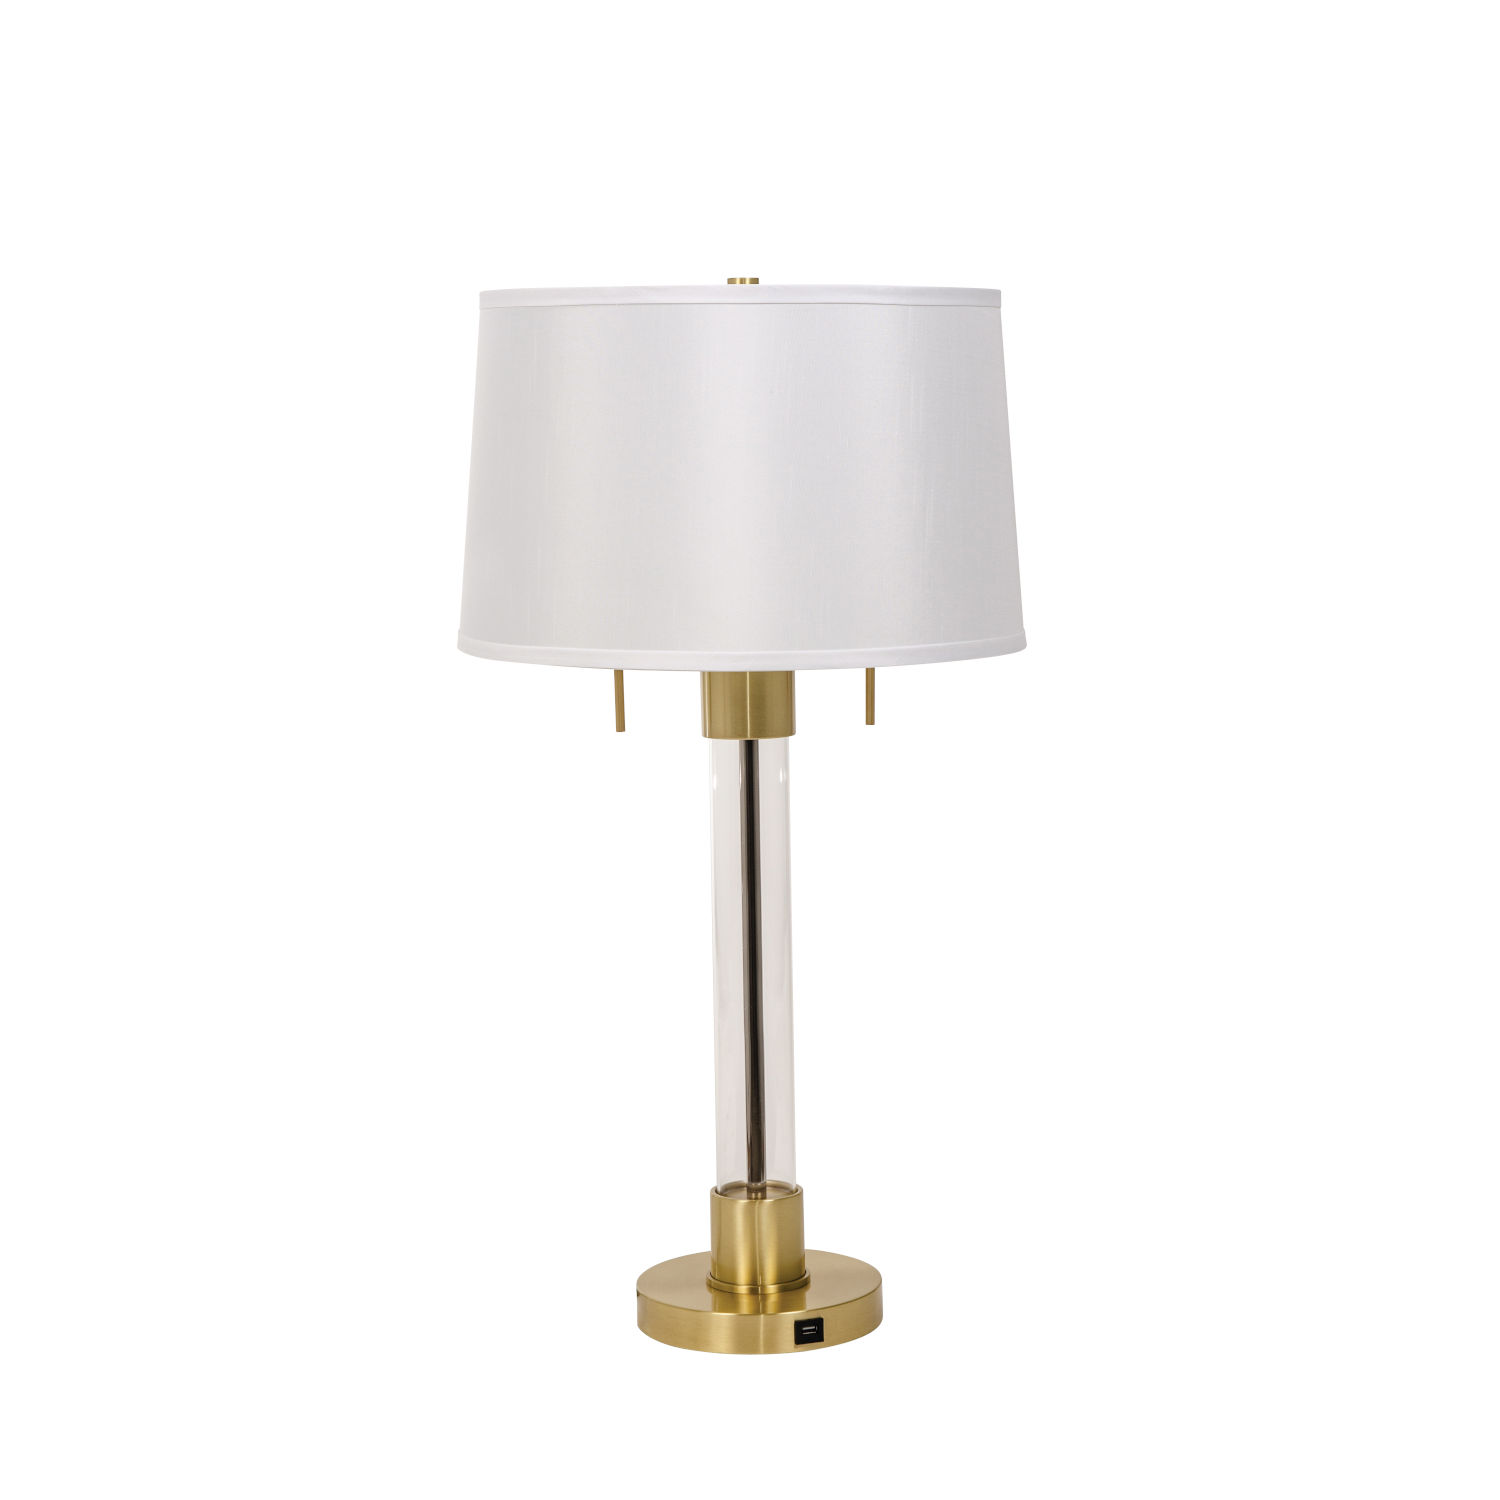 Caspian Brushed Brass Two-Light Table Lamp